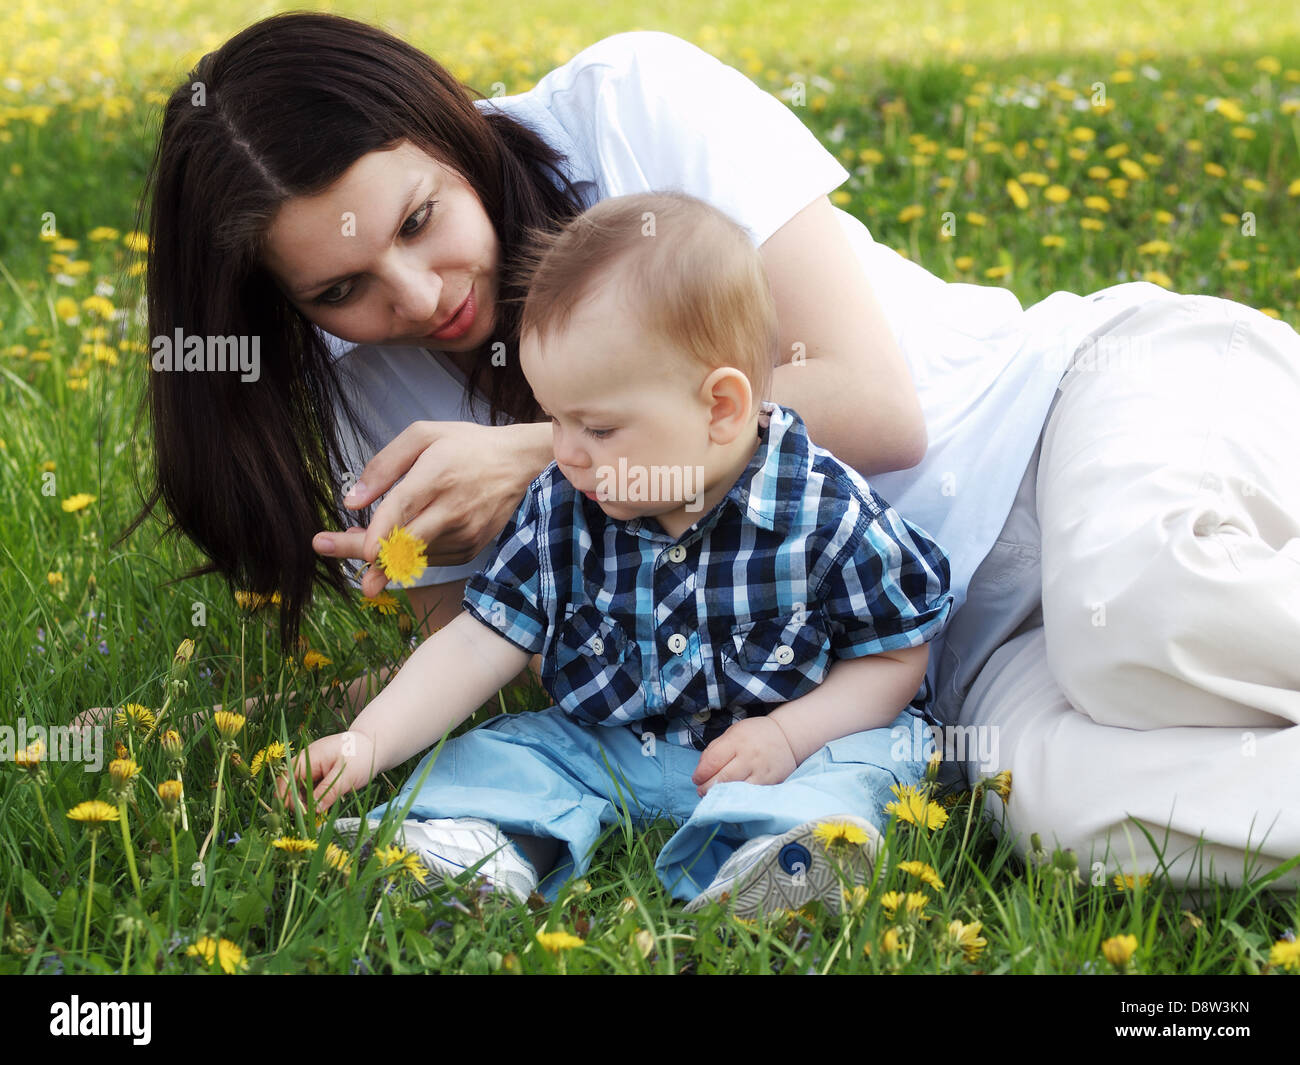 Outdoor children with mother Stock Photo